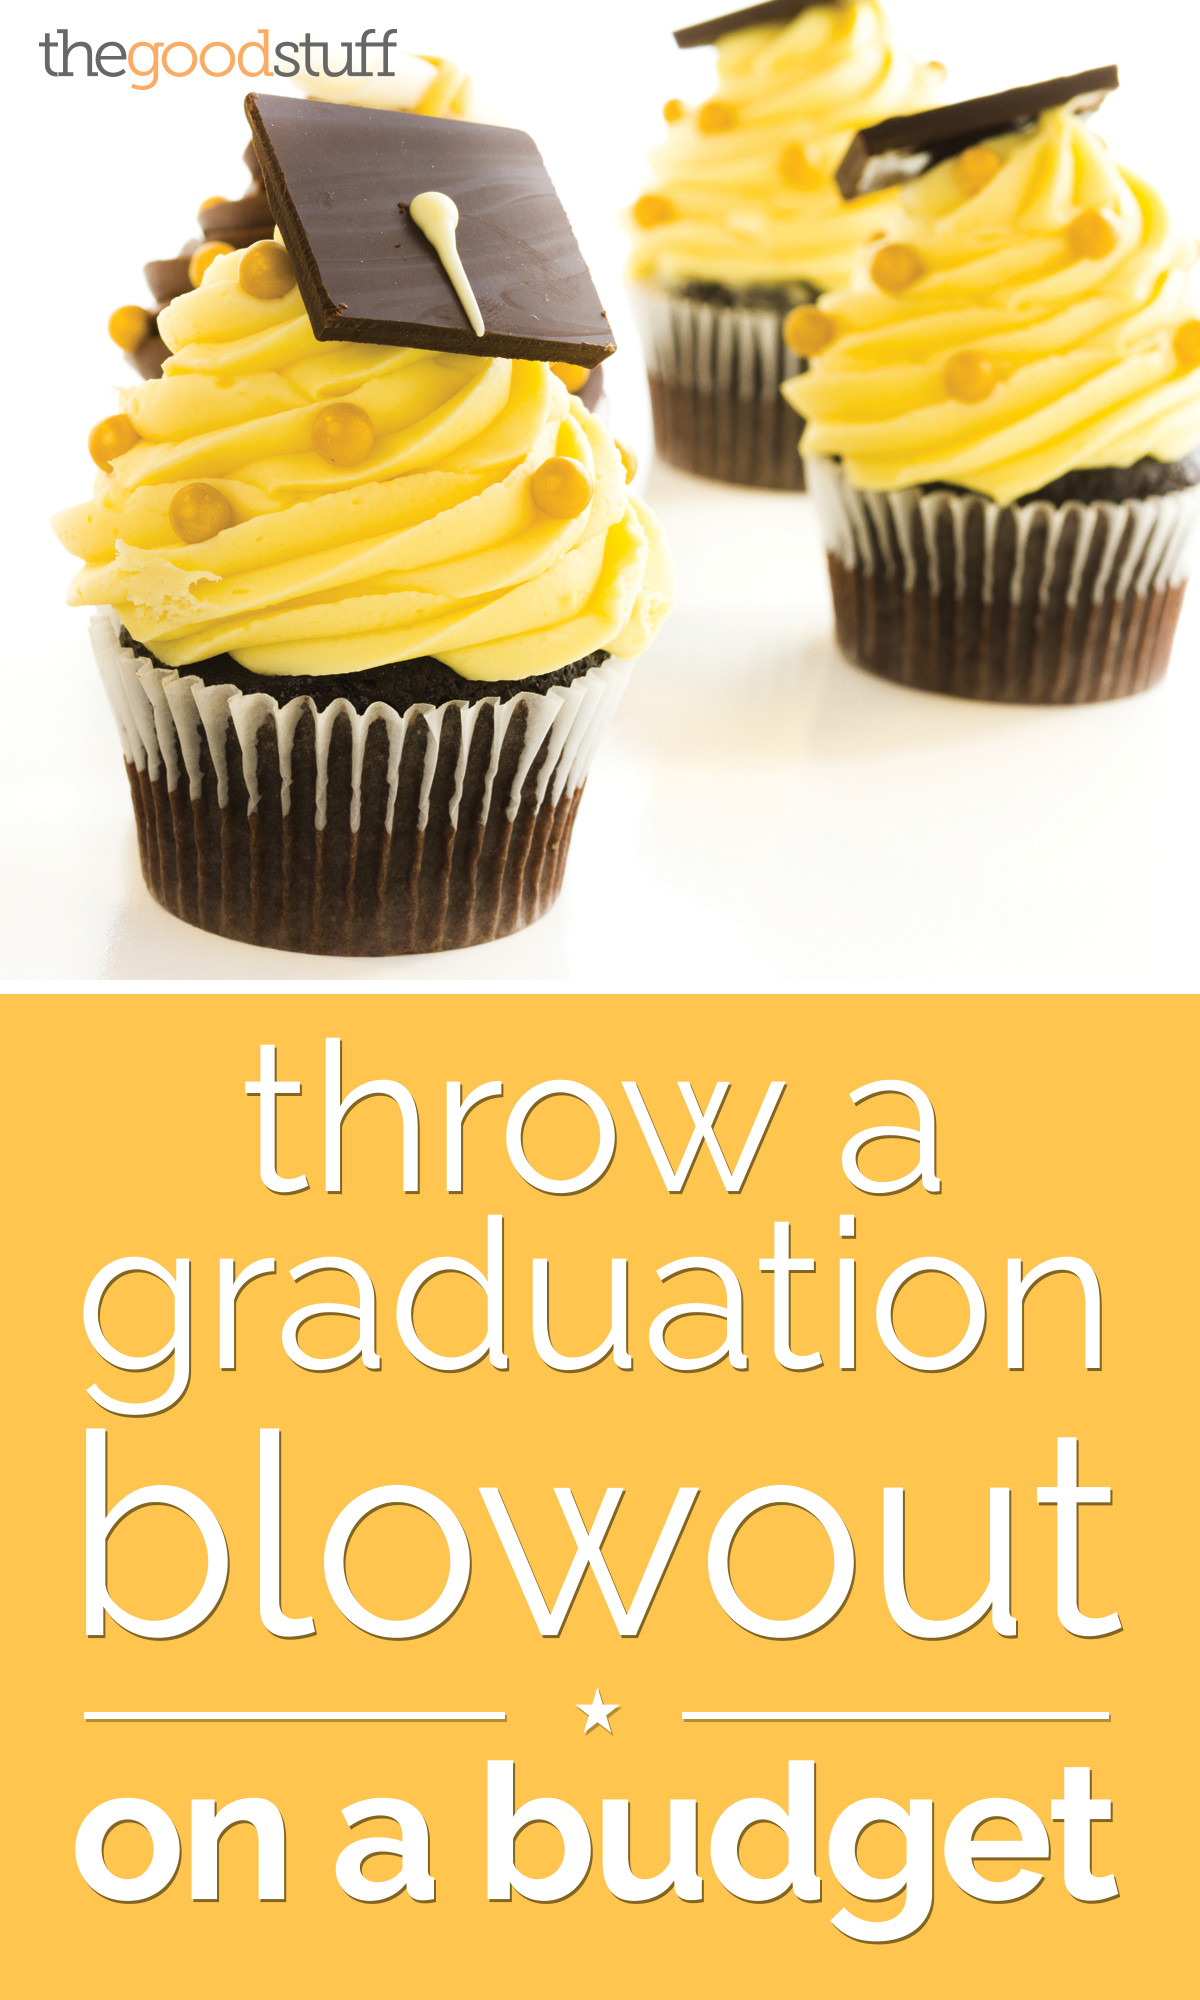 Graduation Party Food Ideas On A Budget
 Throw a Graduation Party Blowout — a Bud thegoodstuff